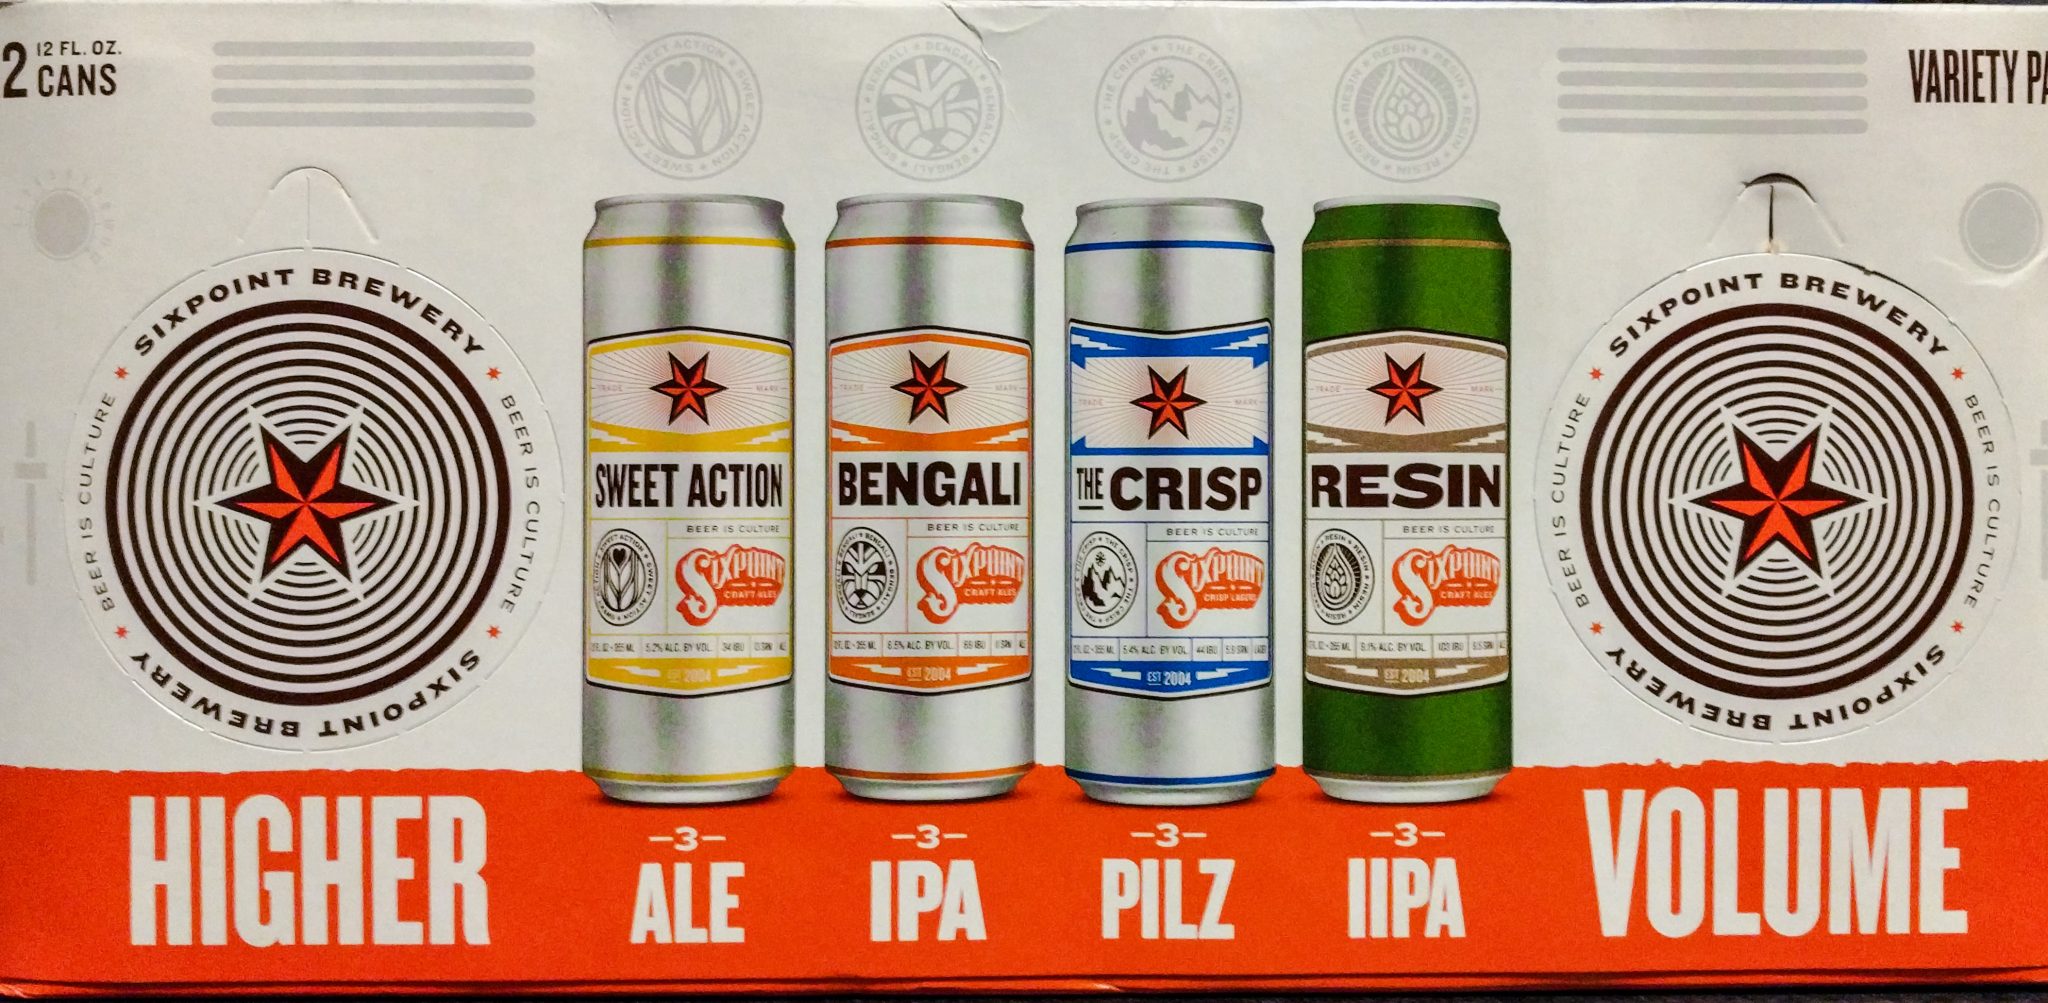 sixpoint brewing variety pack